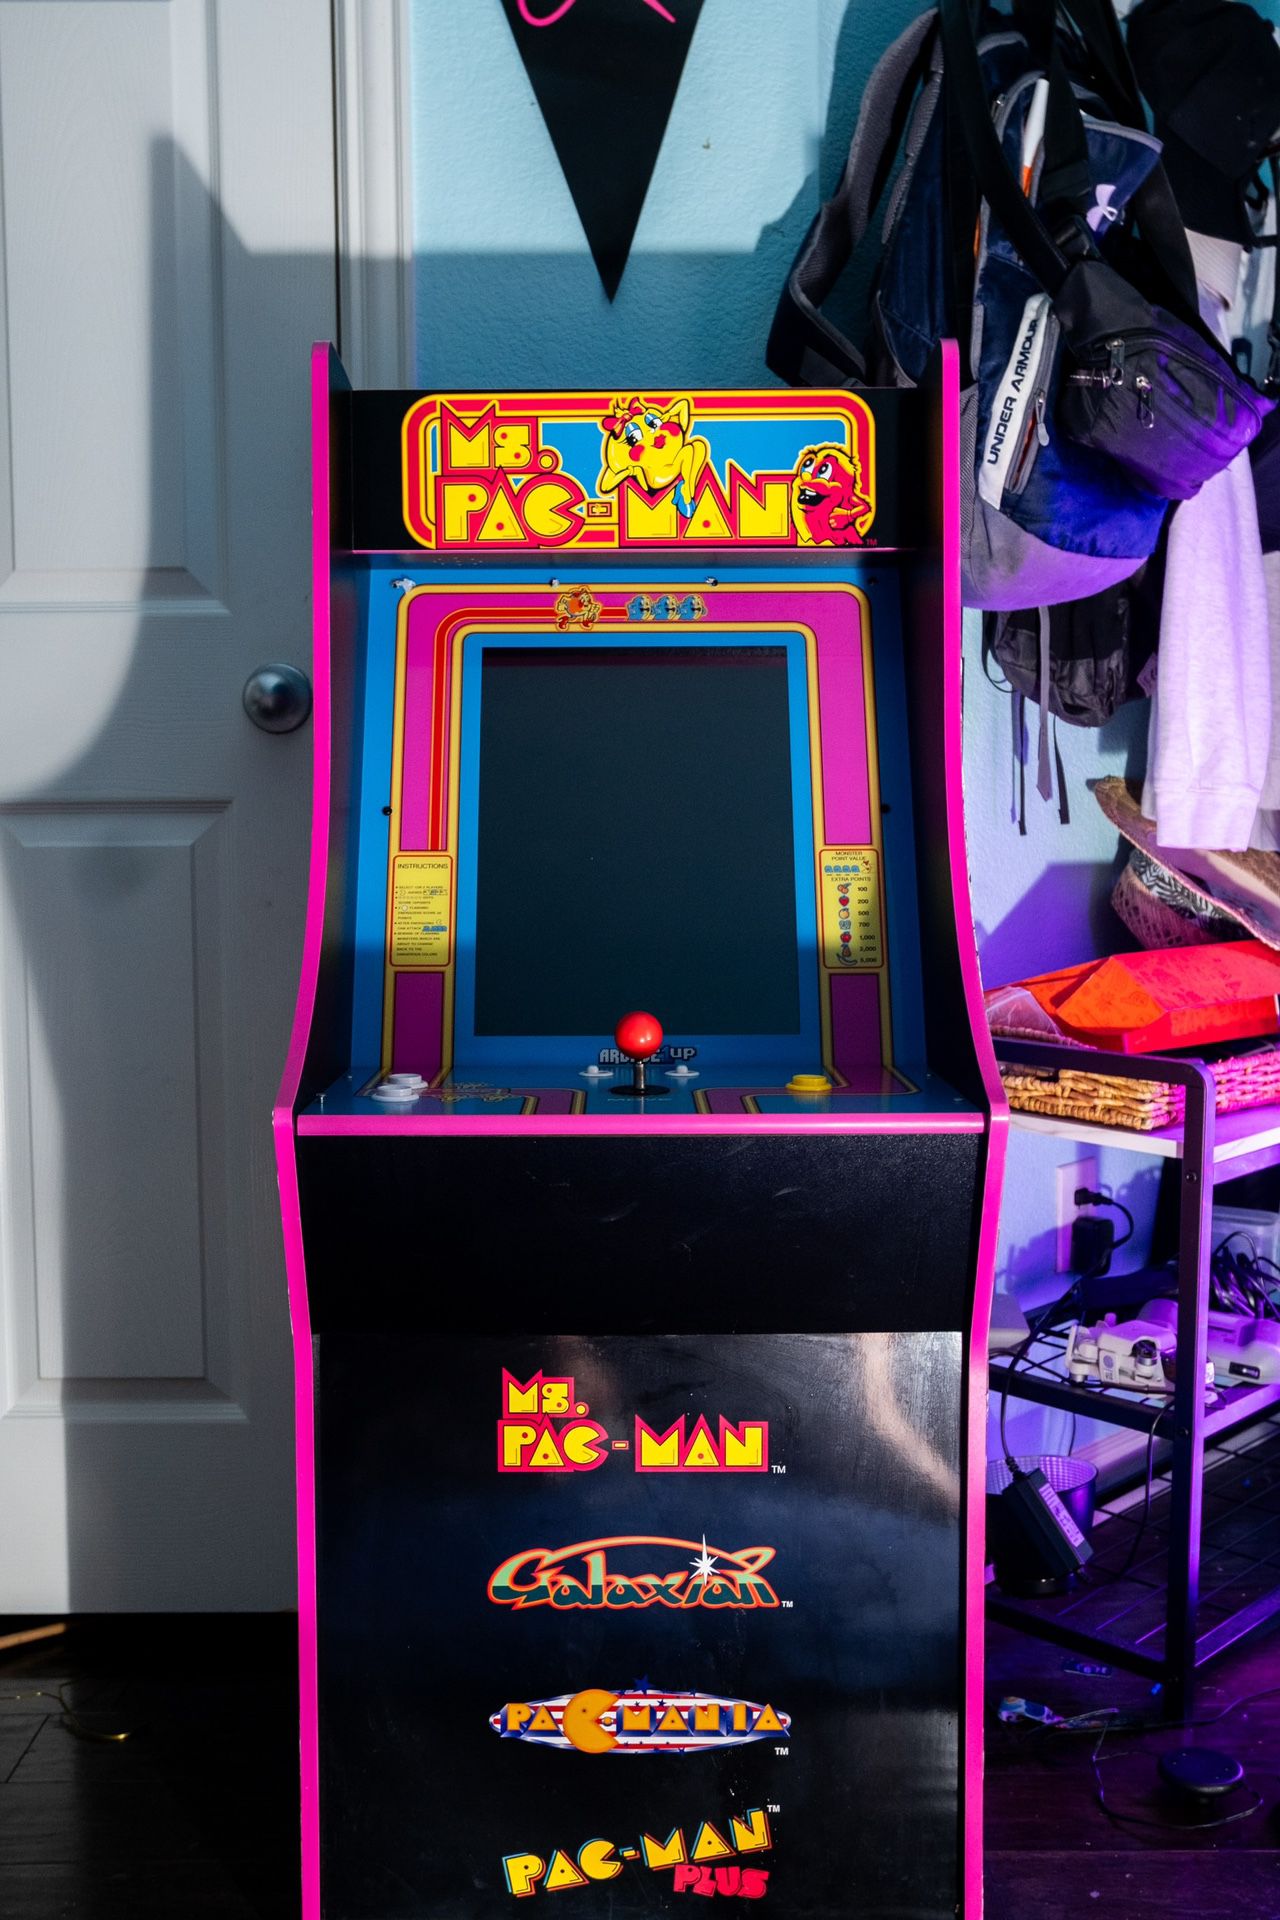 Arcade Machine - Mrs Pac-Man total of 4 different games